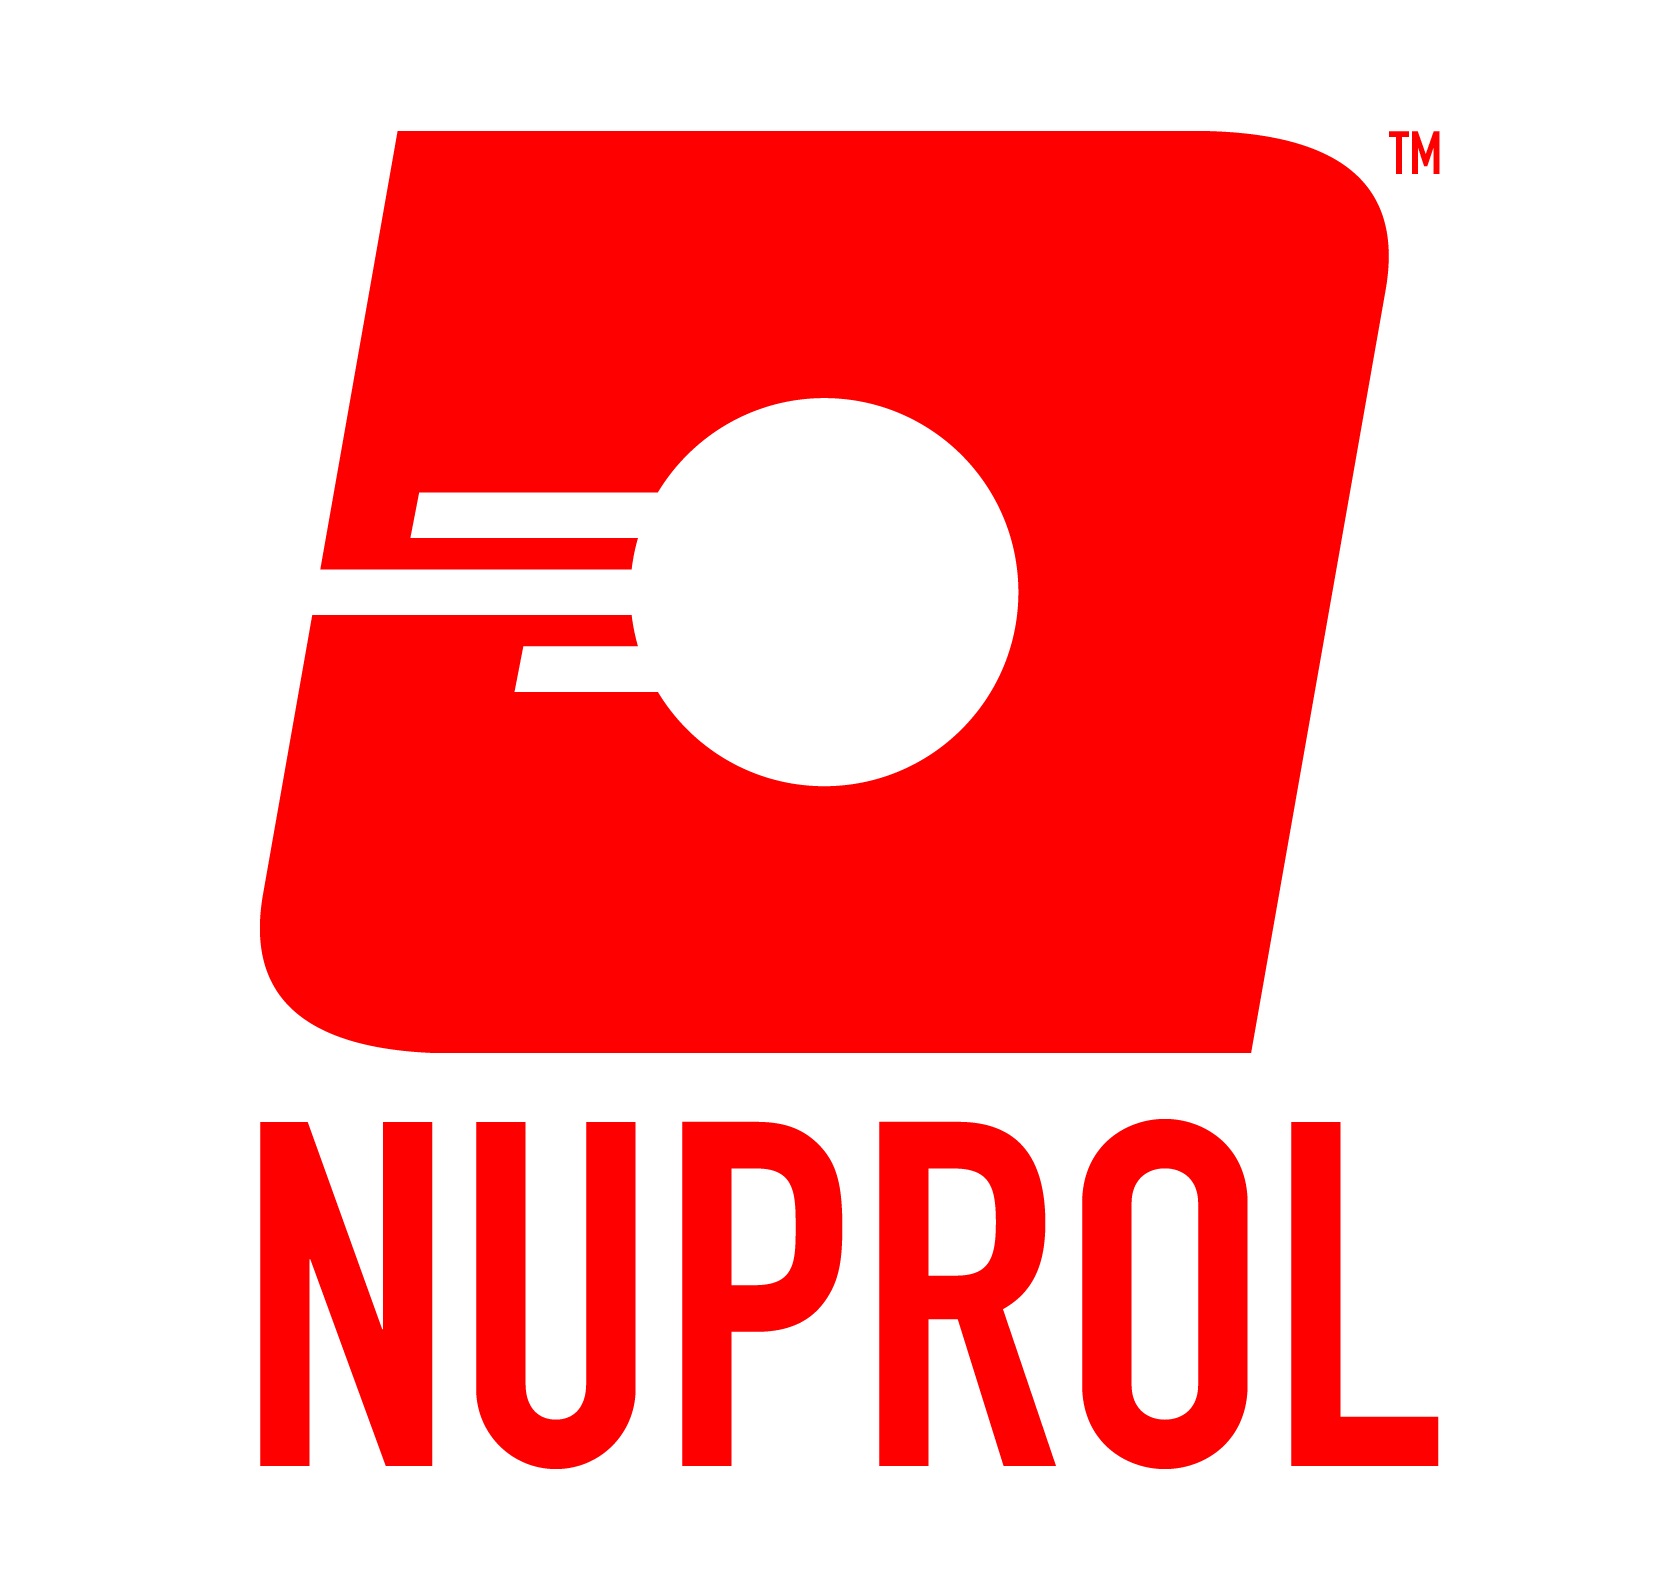 An open letter from Nuprol